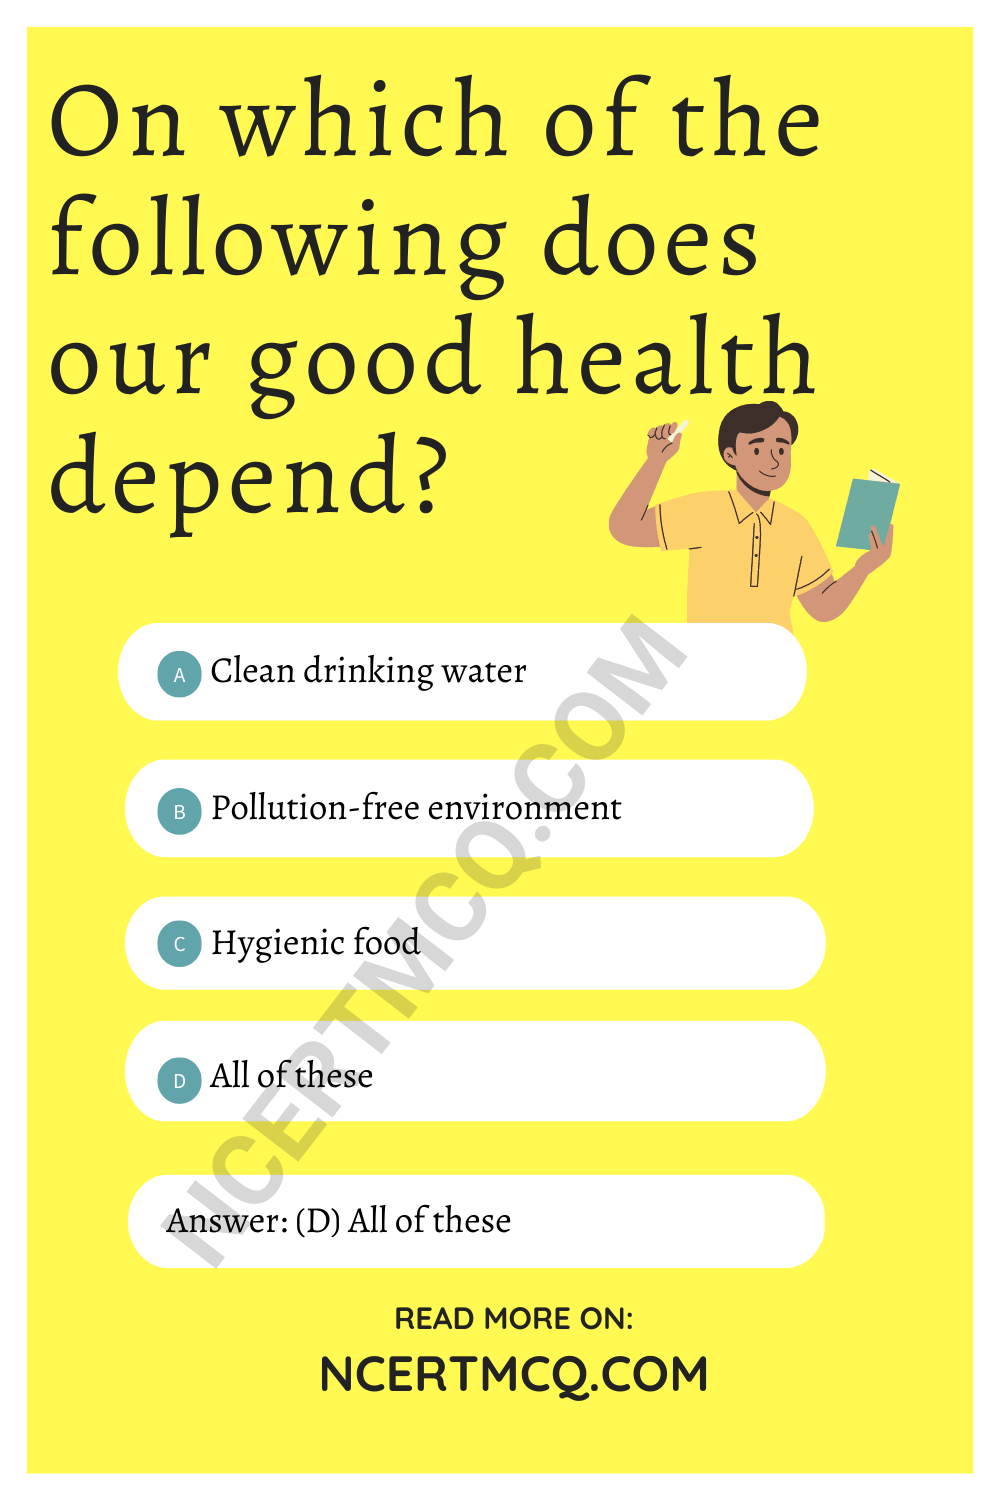 On which of the following does our good health depend?